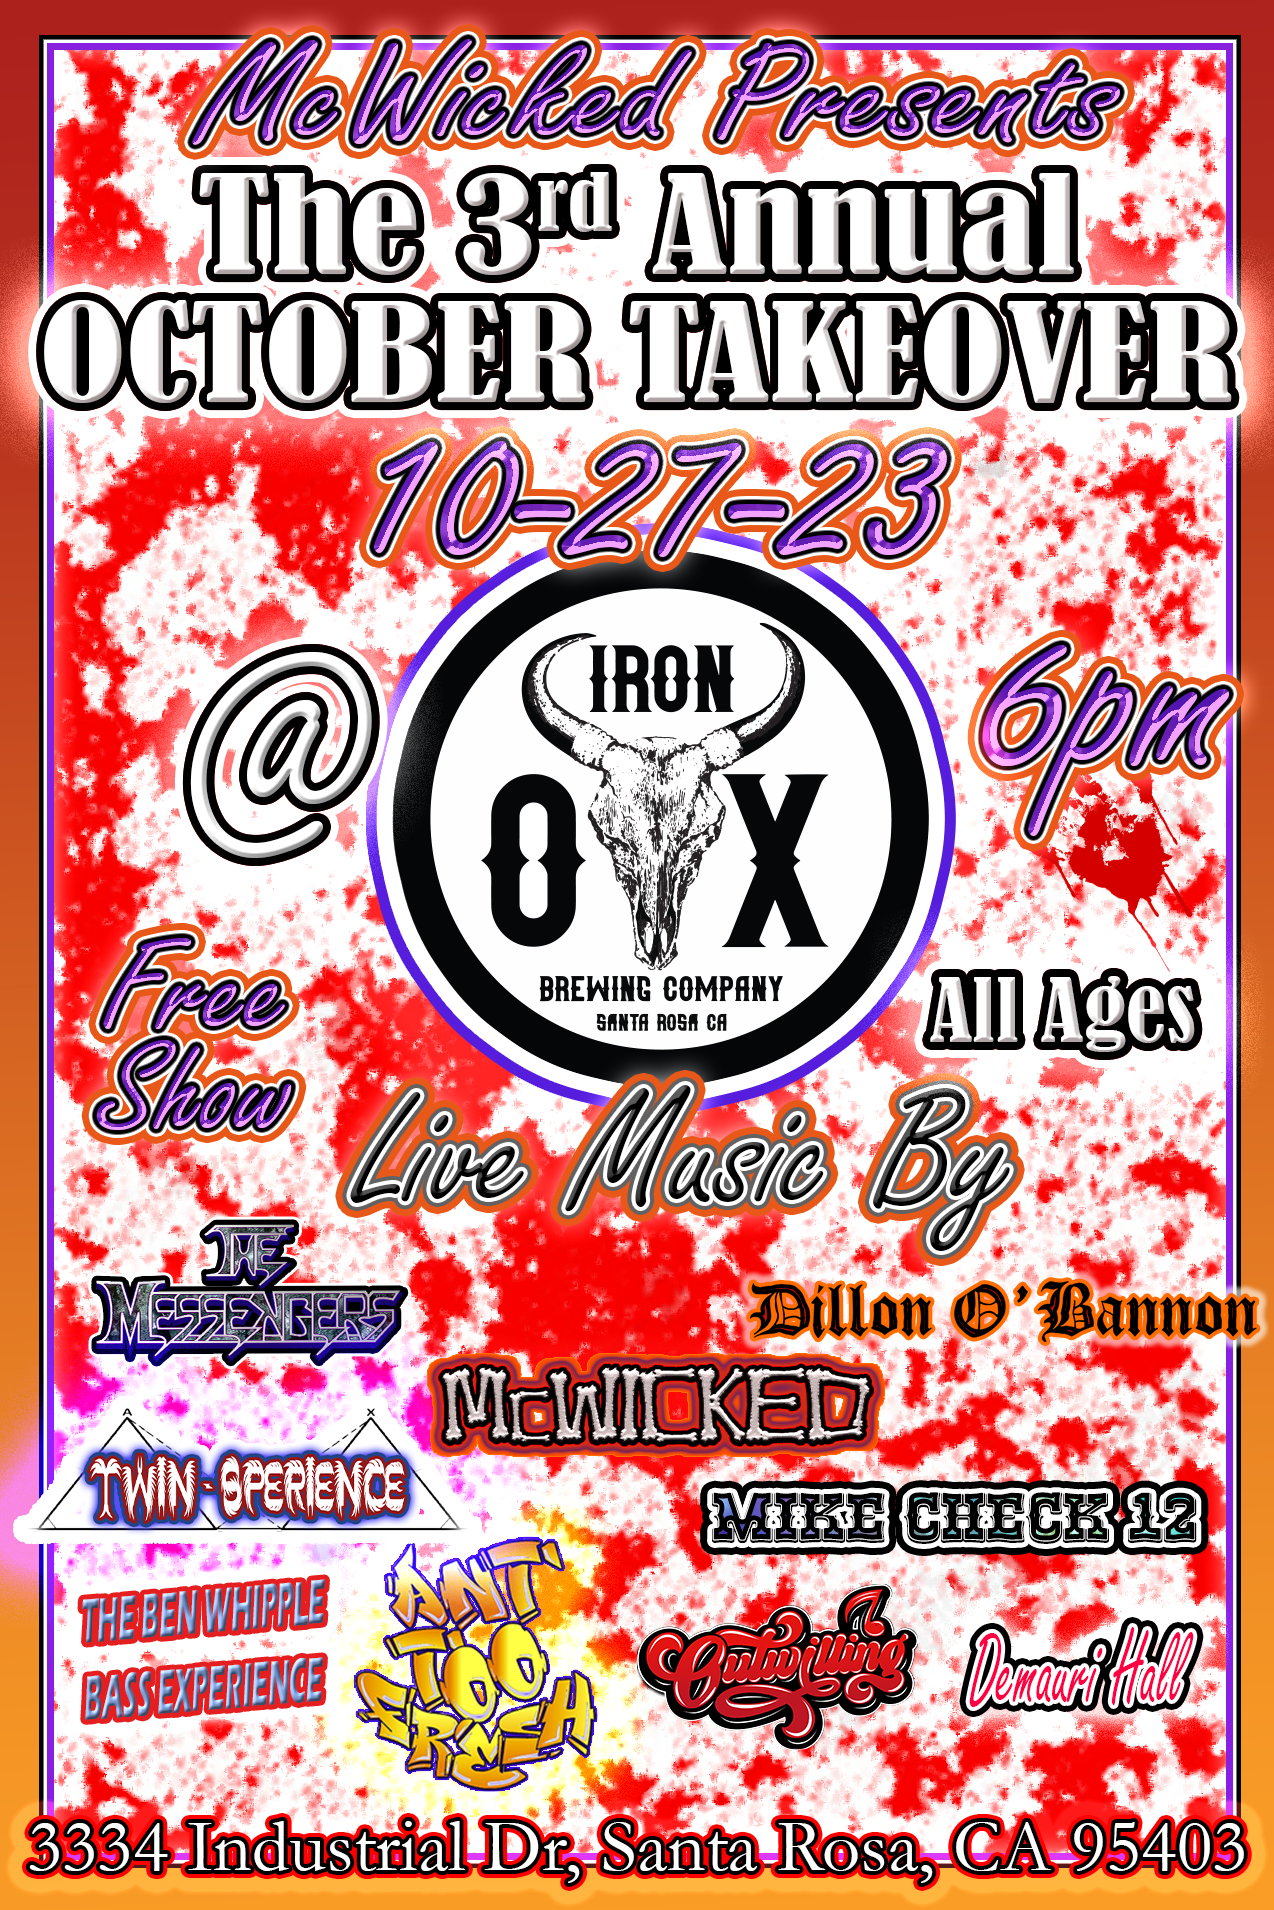 McWicked free show at Iron Ox Brewing in Santa Rosa